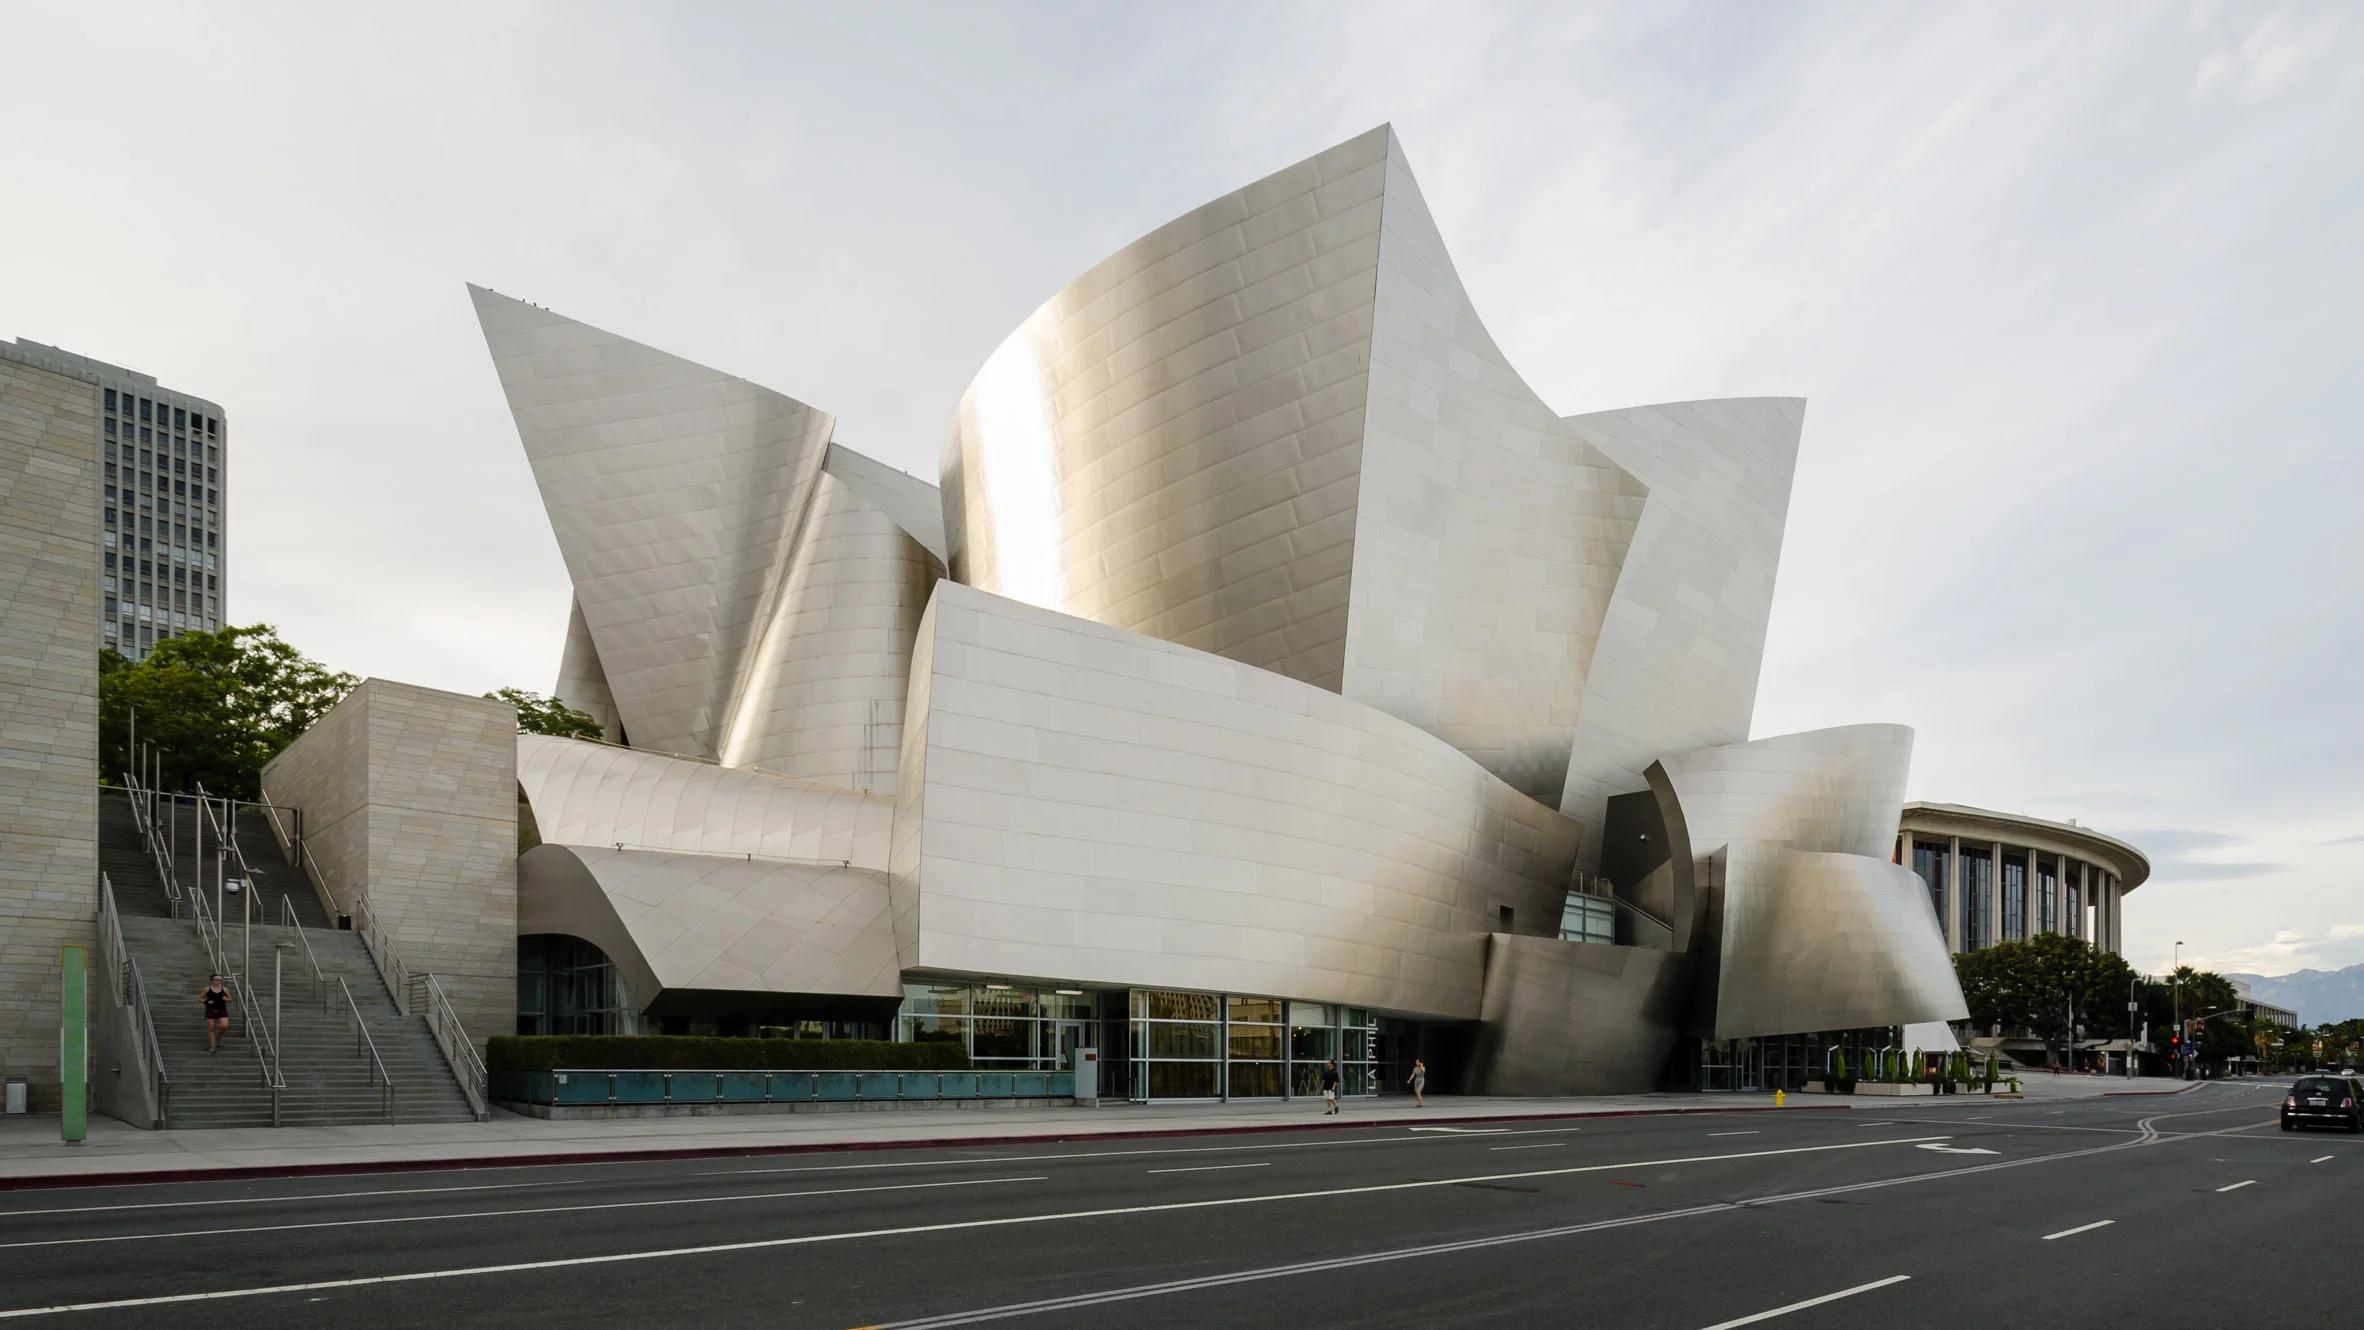 The Walt Disney Concert Hall: A Masterpiece Of Architecture And Design By Frank Gehry